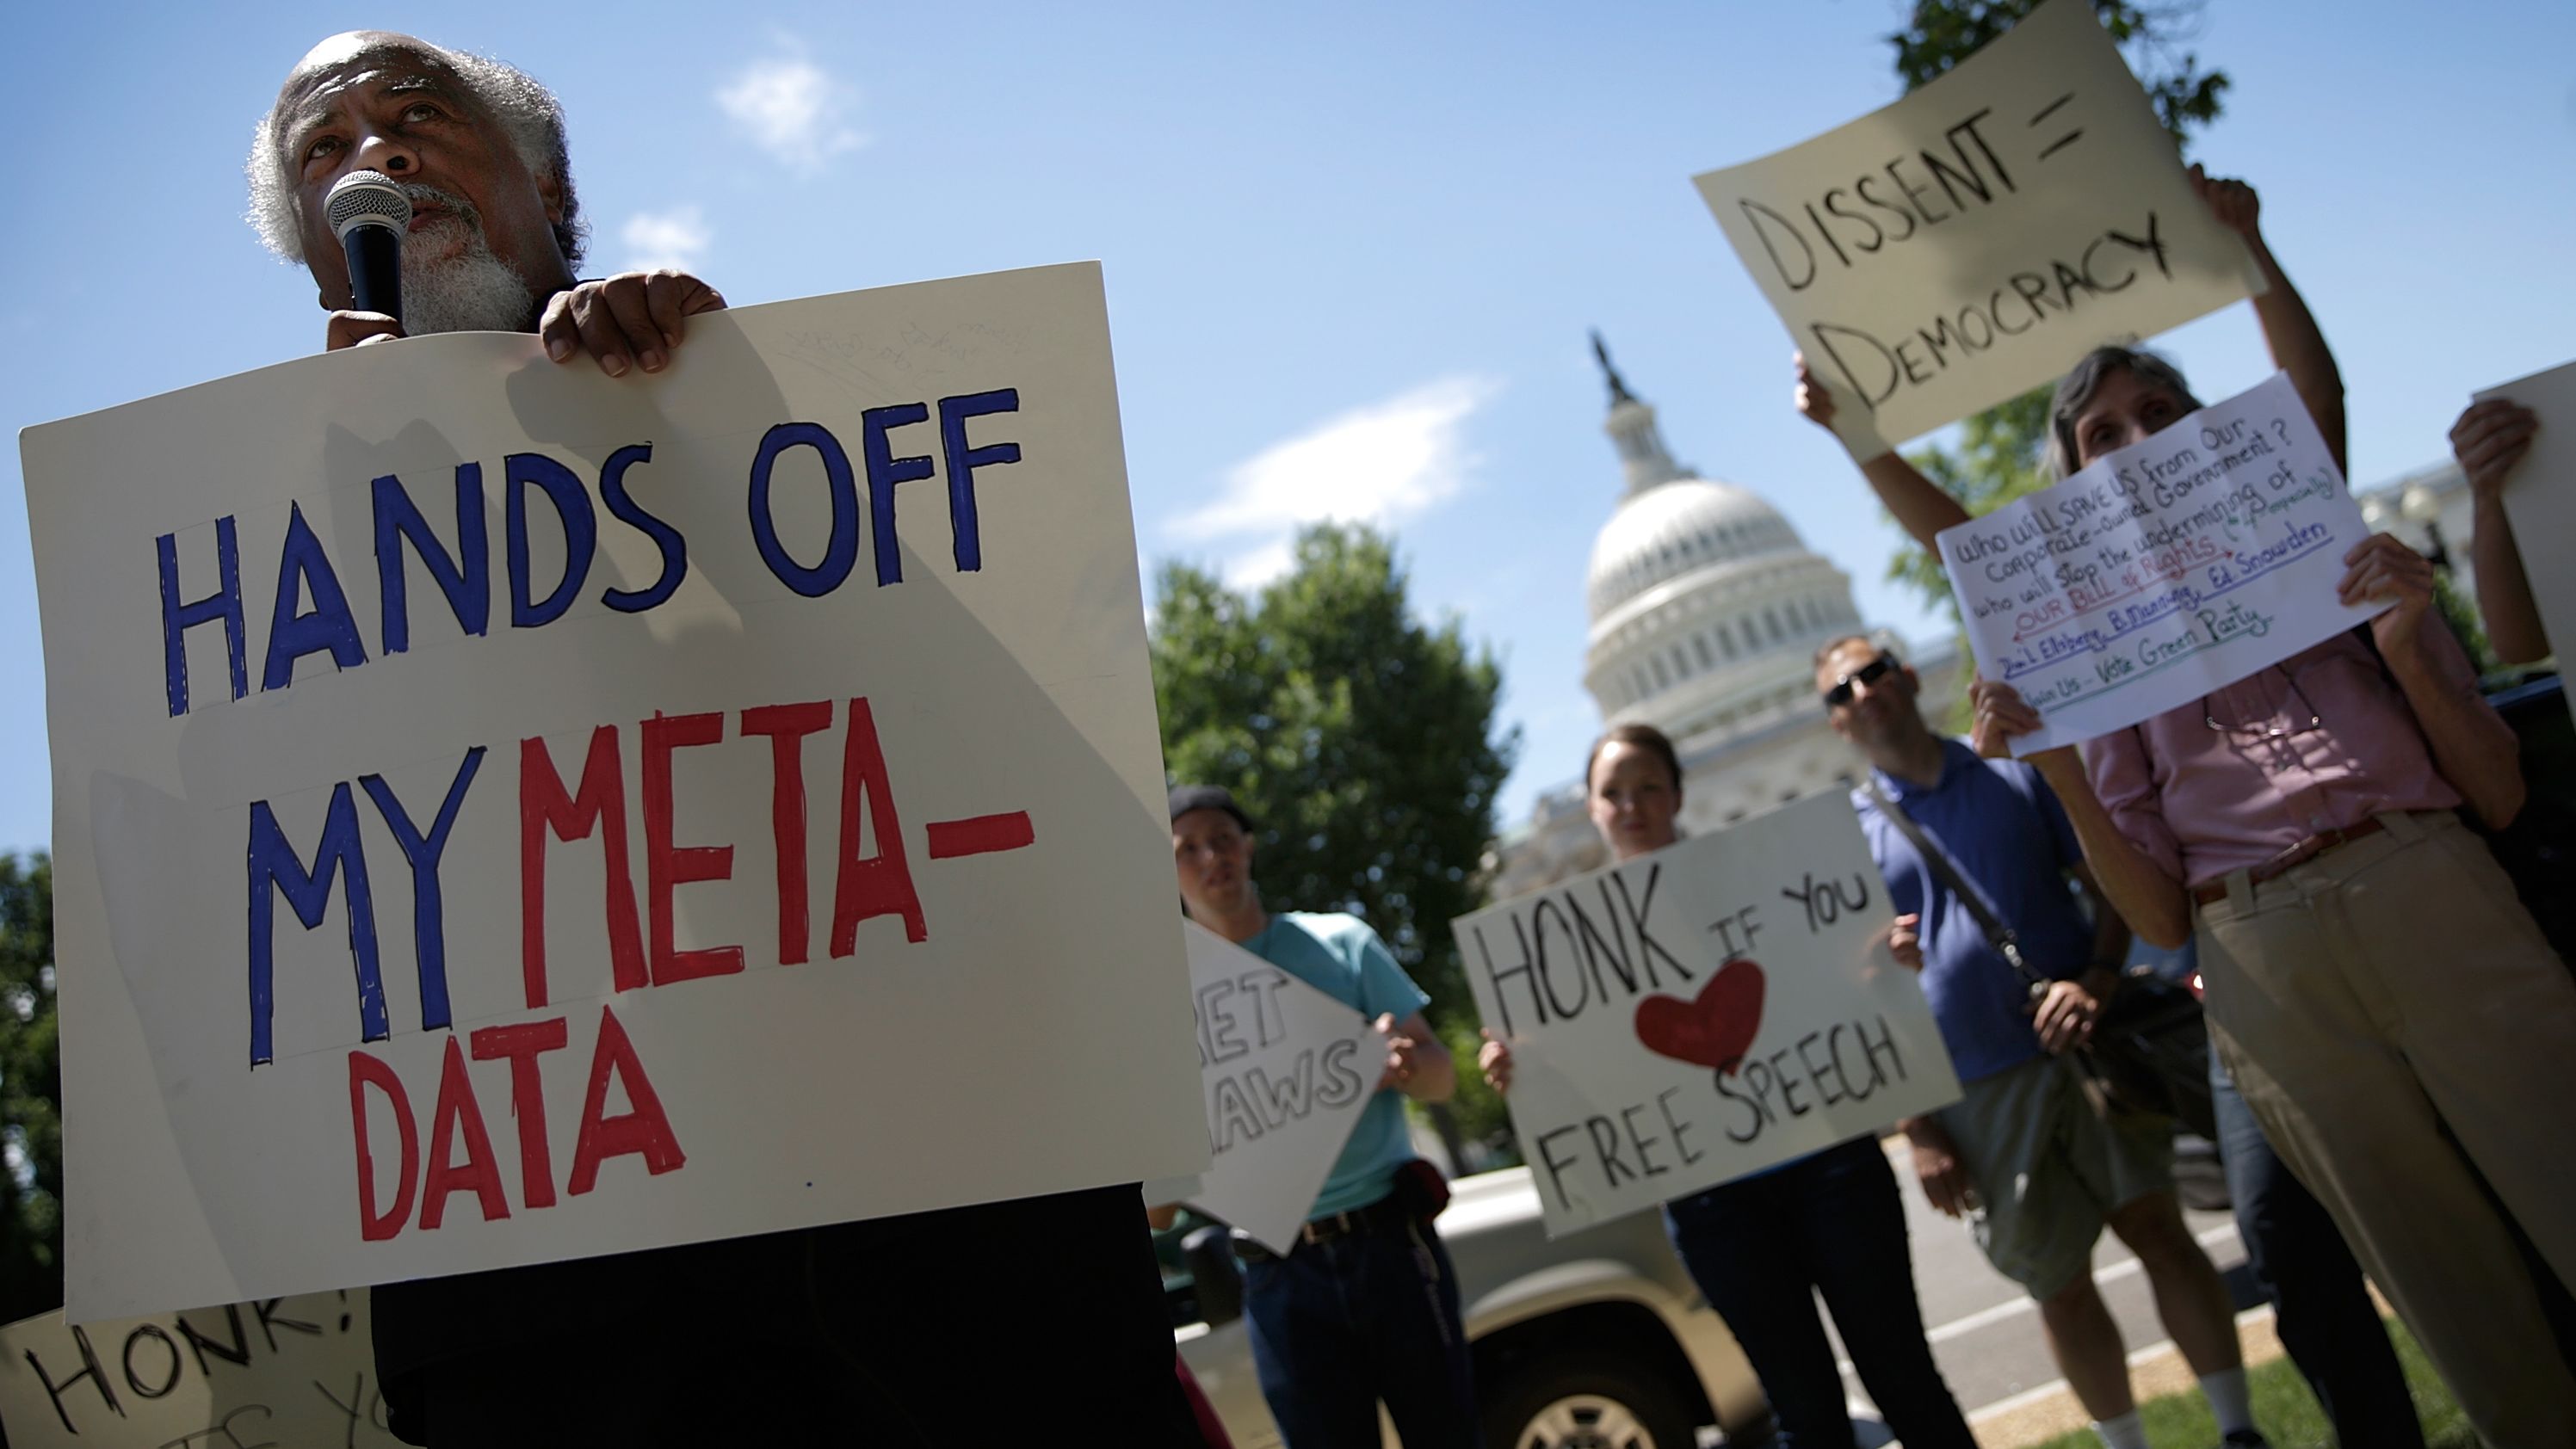 Demonstrators gathered in Washington D.C. to protest the National Security Agency domestic spying programs. 